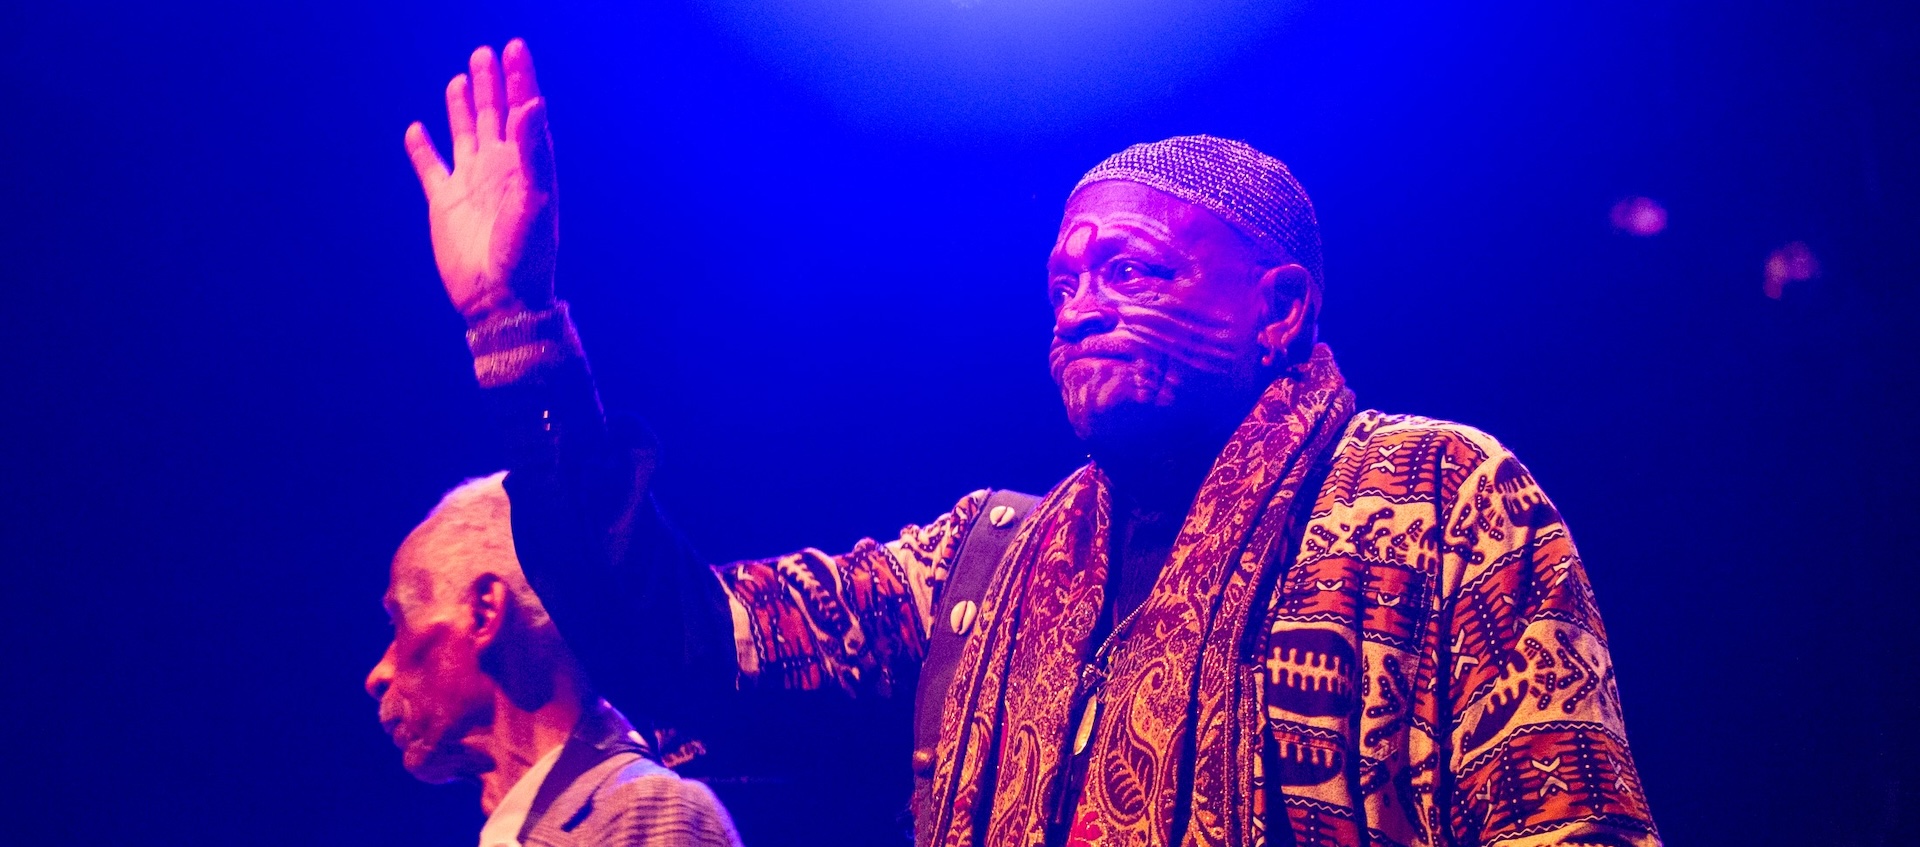 Two older men stand on stage under a blue light, one is wearing tribal face paint and waiving.  